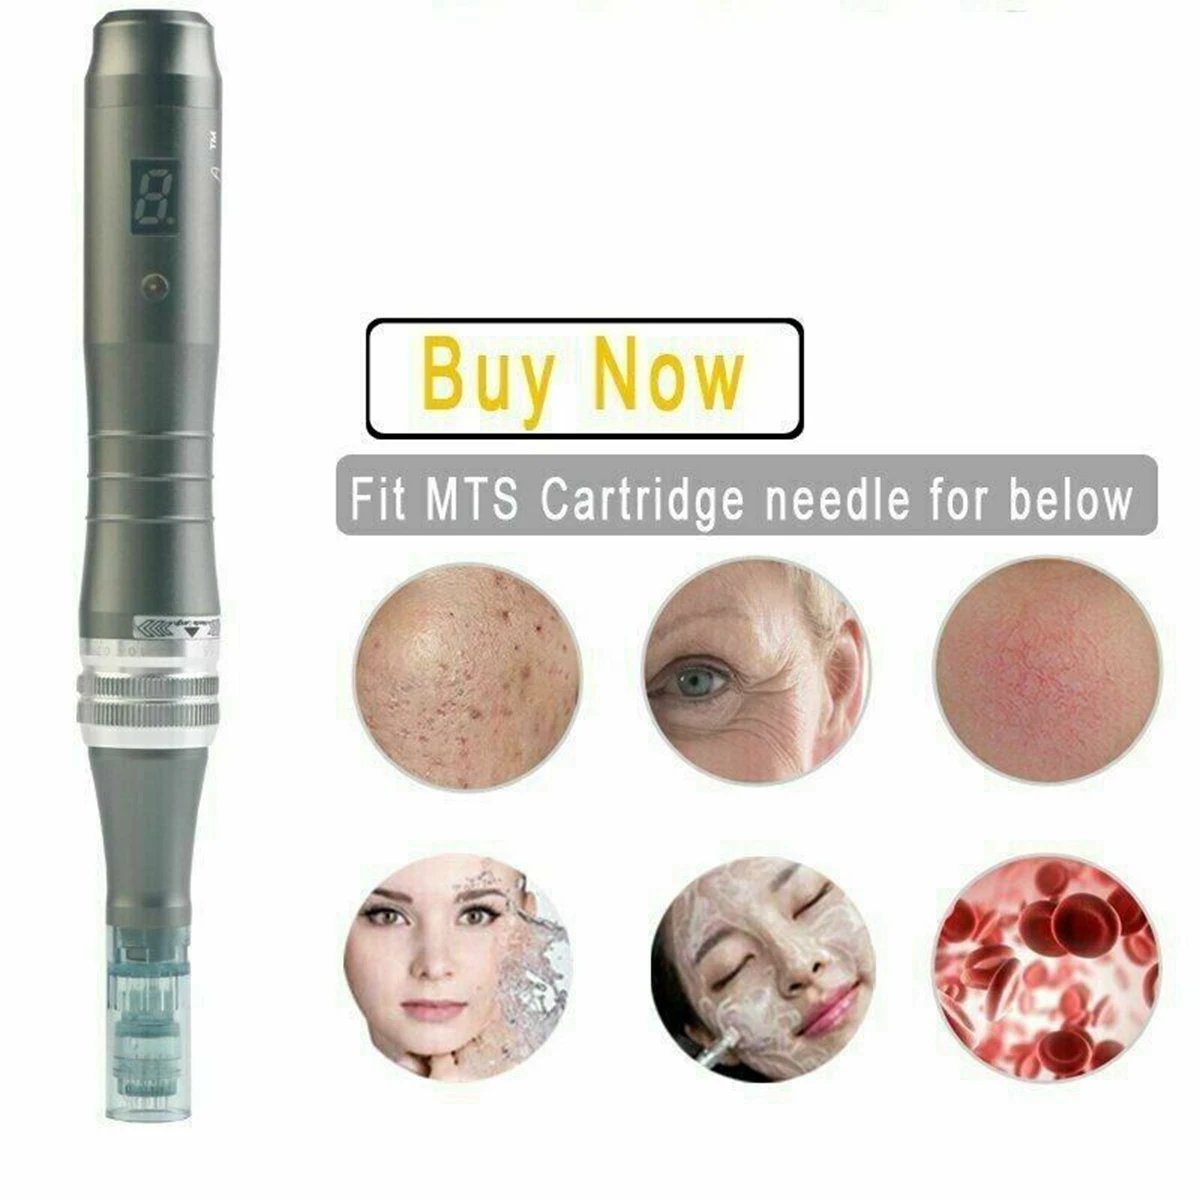 Hot Sale Micro Needling Pen Wired 6 Digital Speed Dr.Pen M8-C Needle Cartridge For Micr Needle Therapy Facial Skin Care